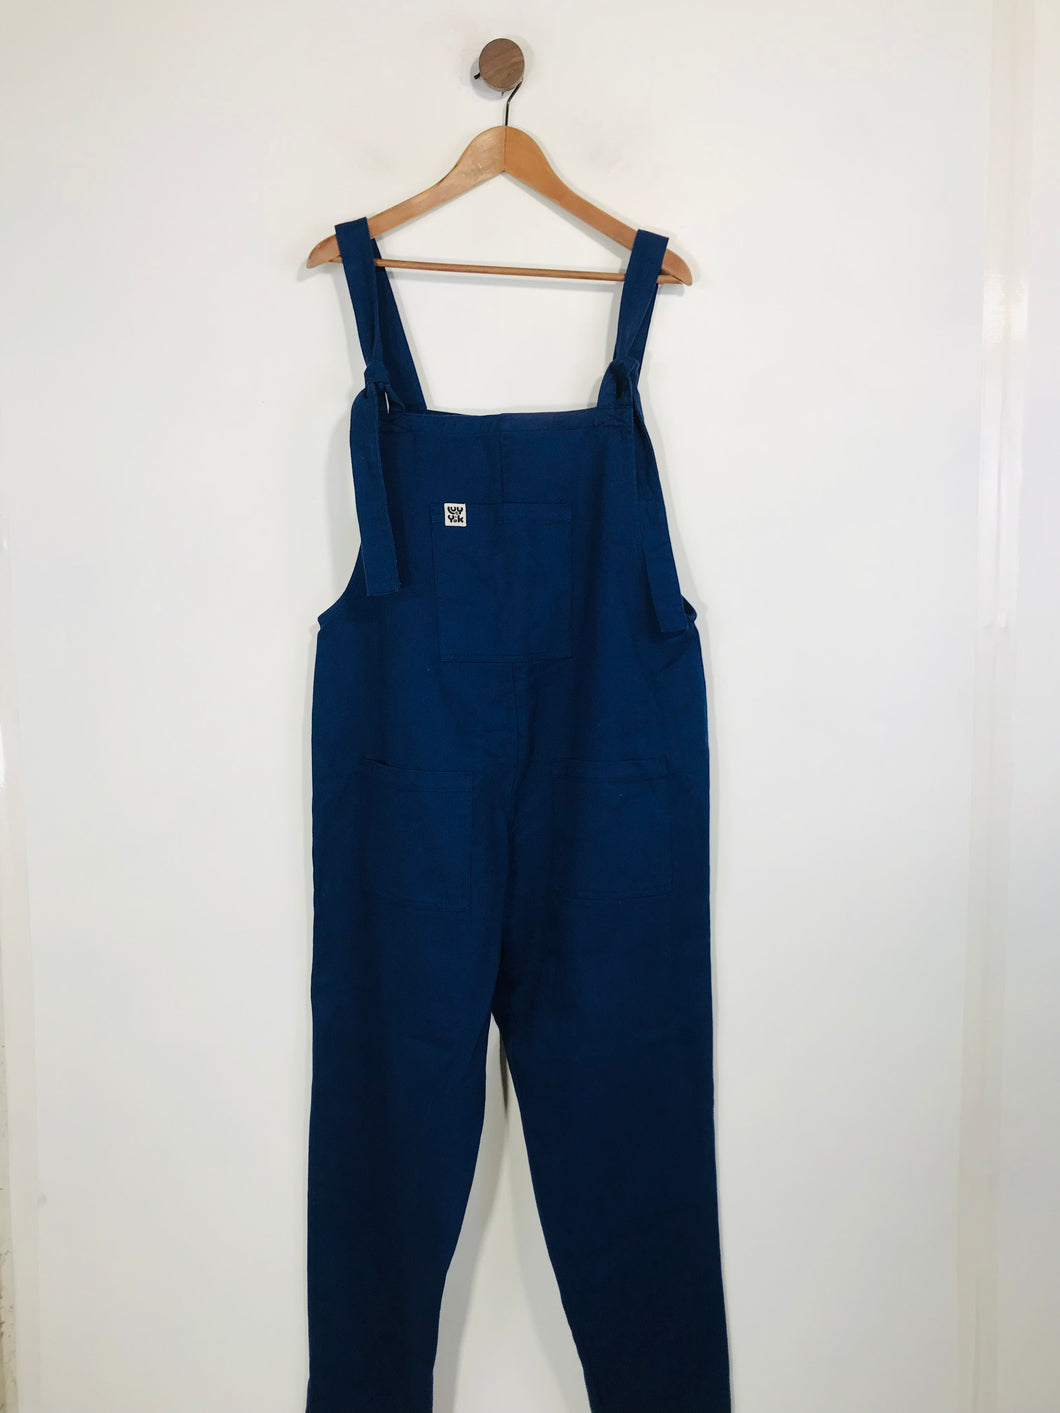 Lucy & Yak Women's Cotton Dungarees | M UK10-12 | Blue